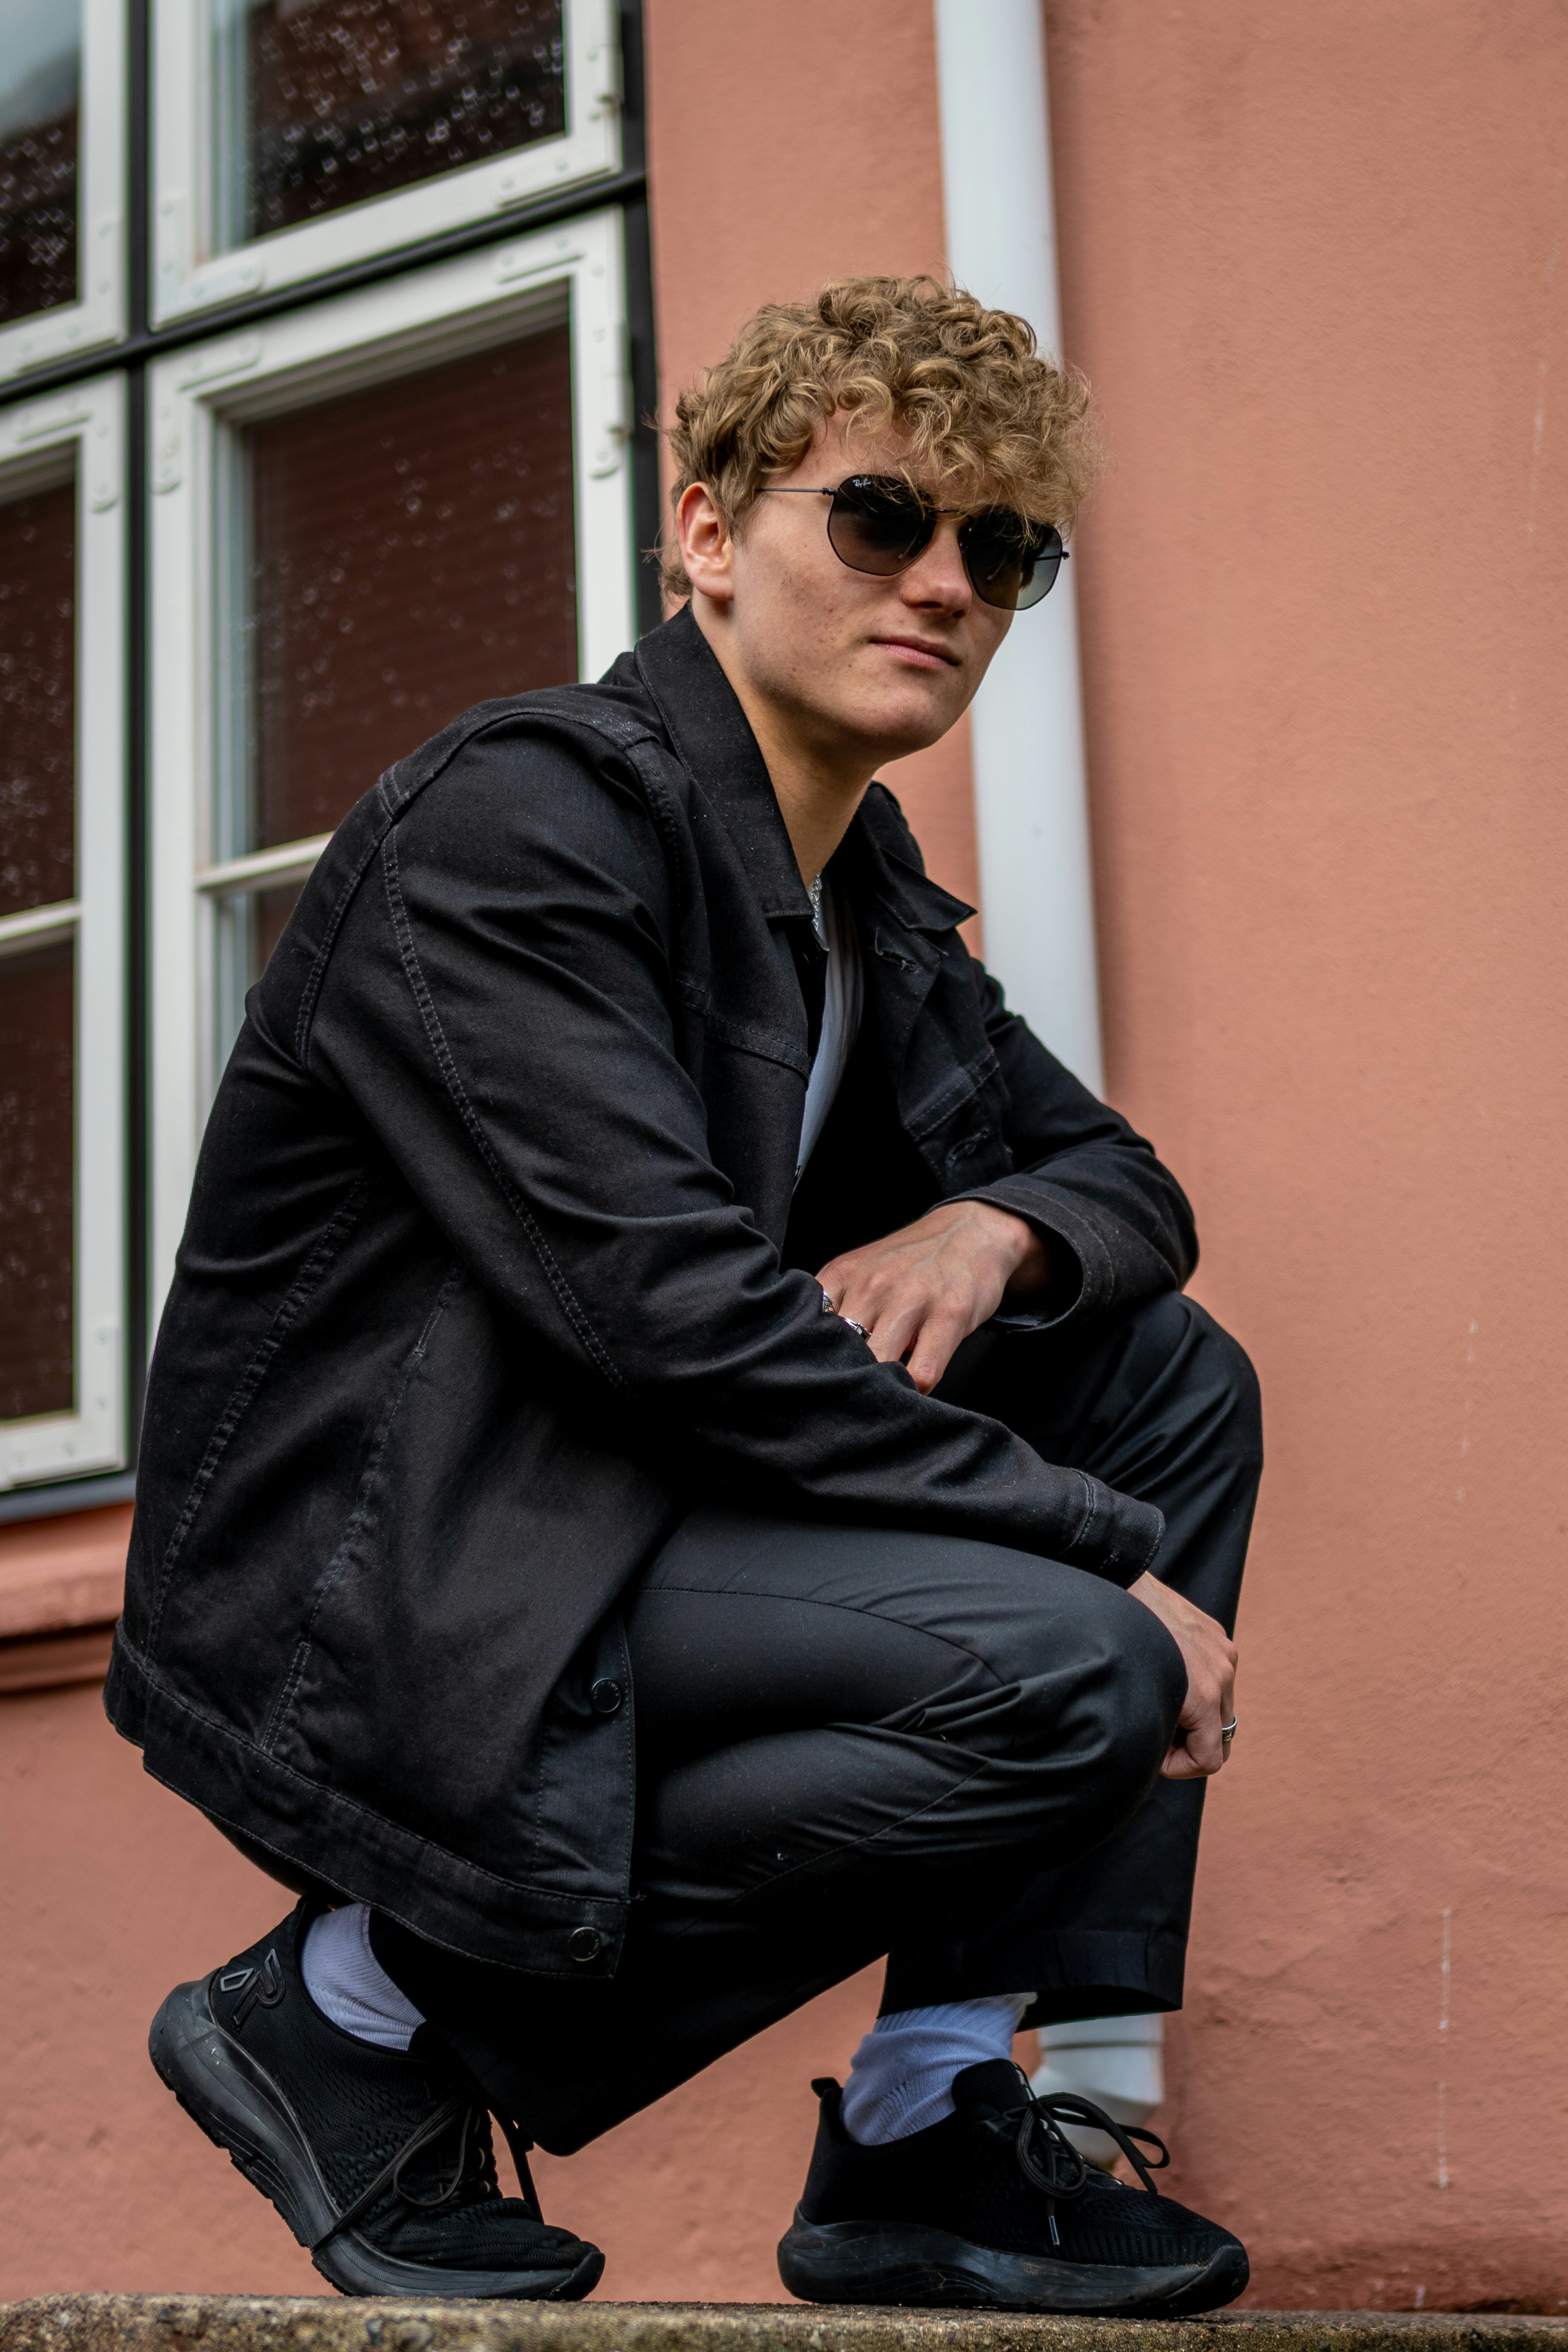 great photo recipe,how to photograph young adult portrait; a man in a black jacket and sunglasses sitting on a step